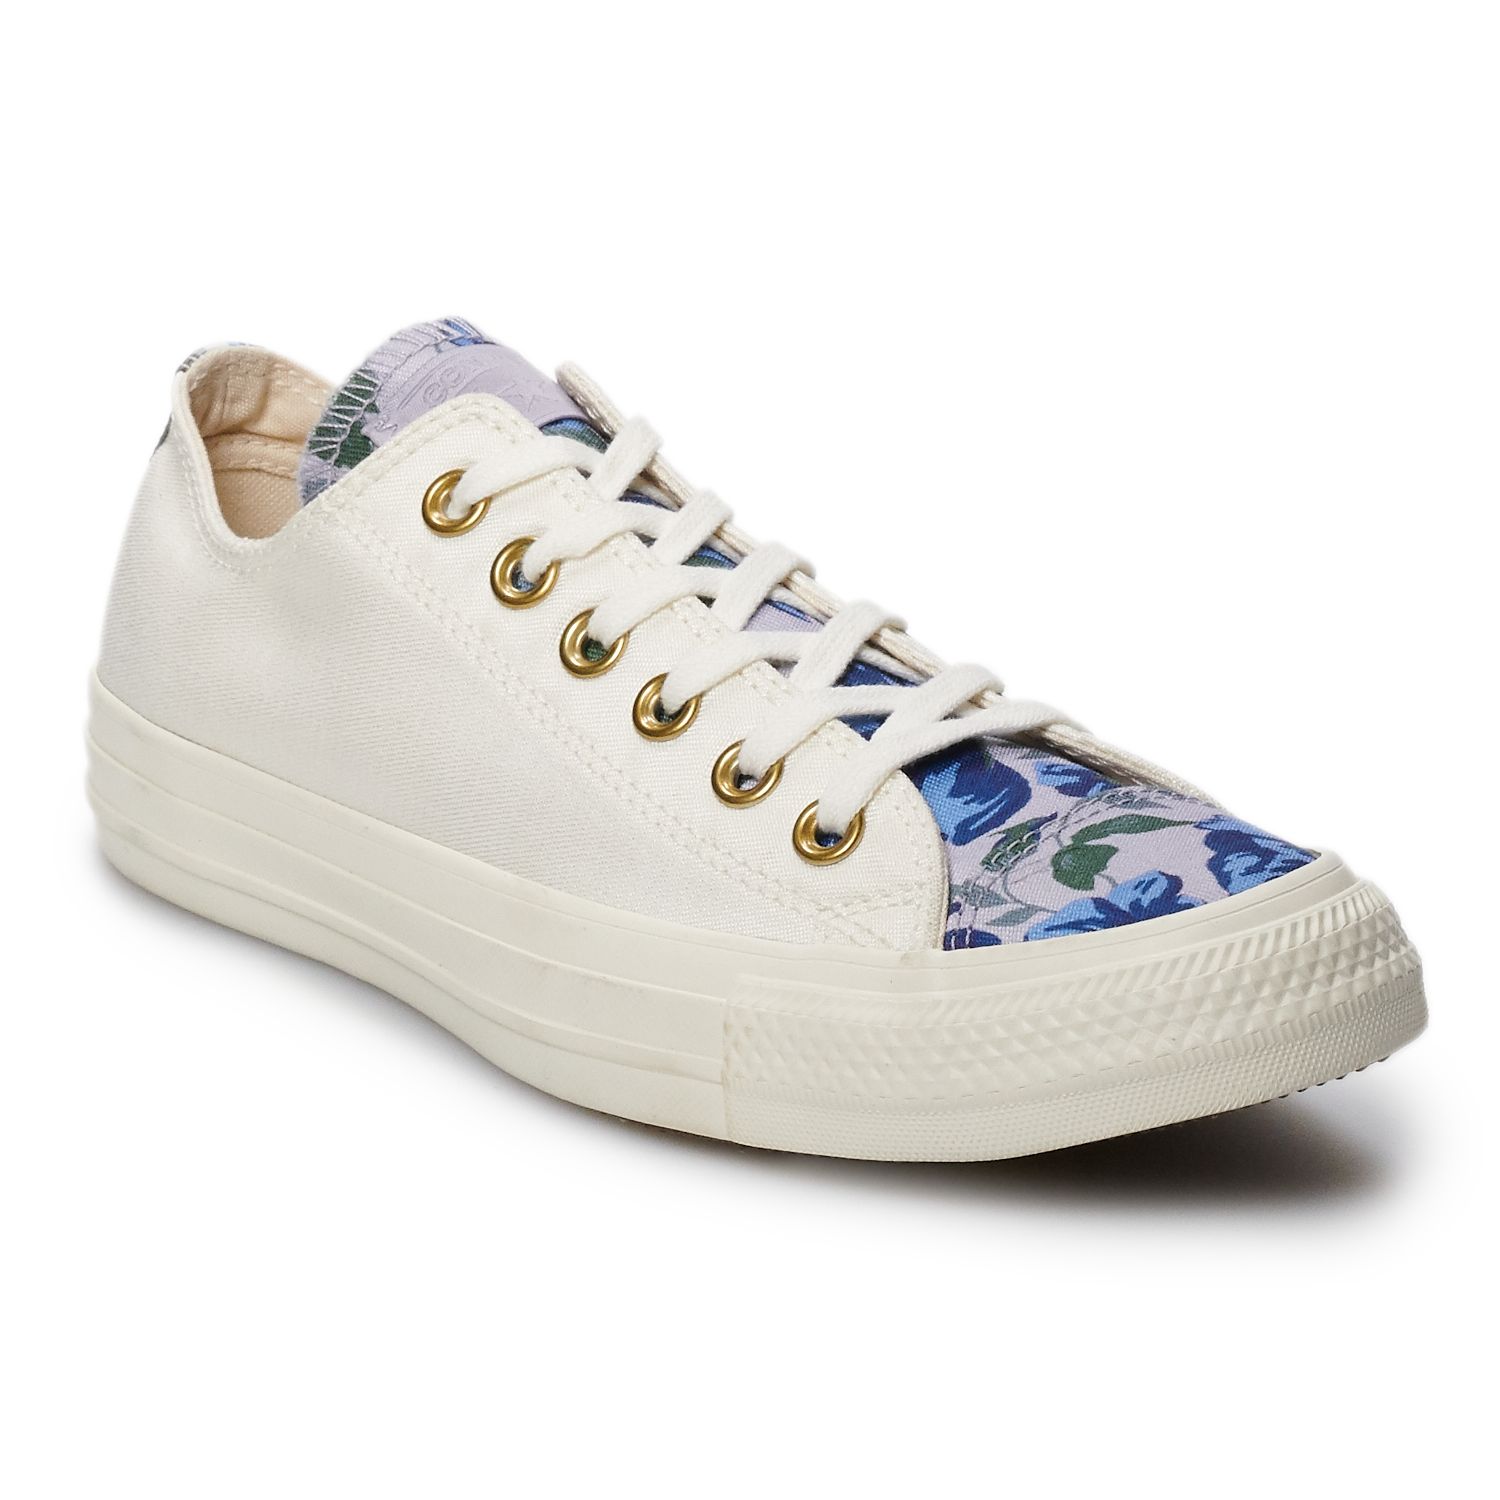 women's converse chuck taylor all star floral sneakers